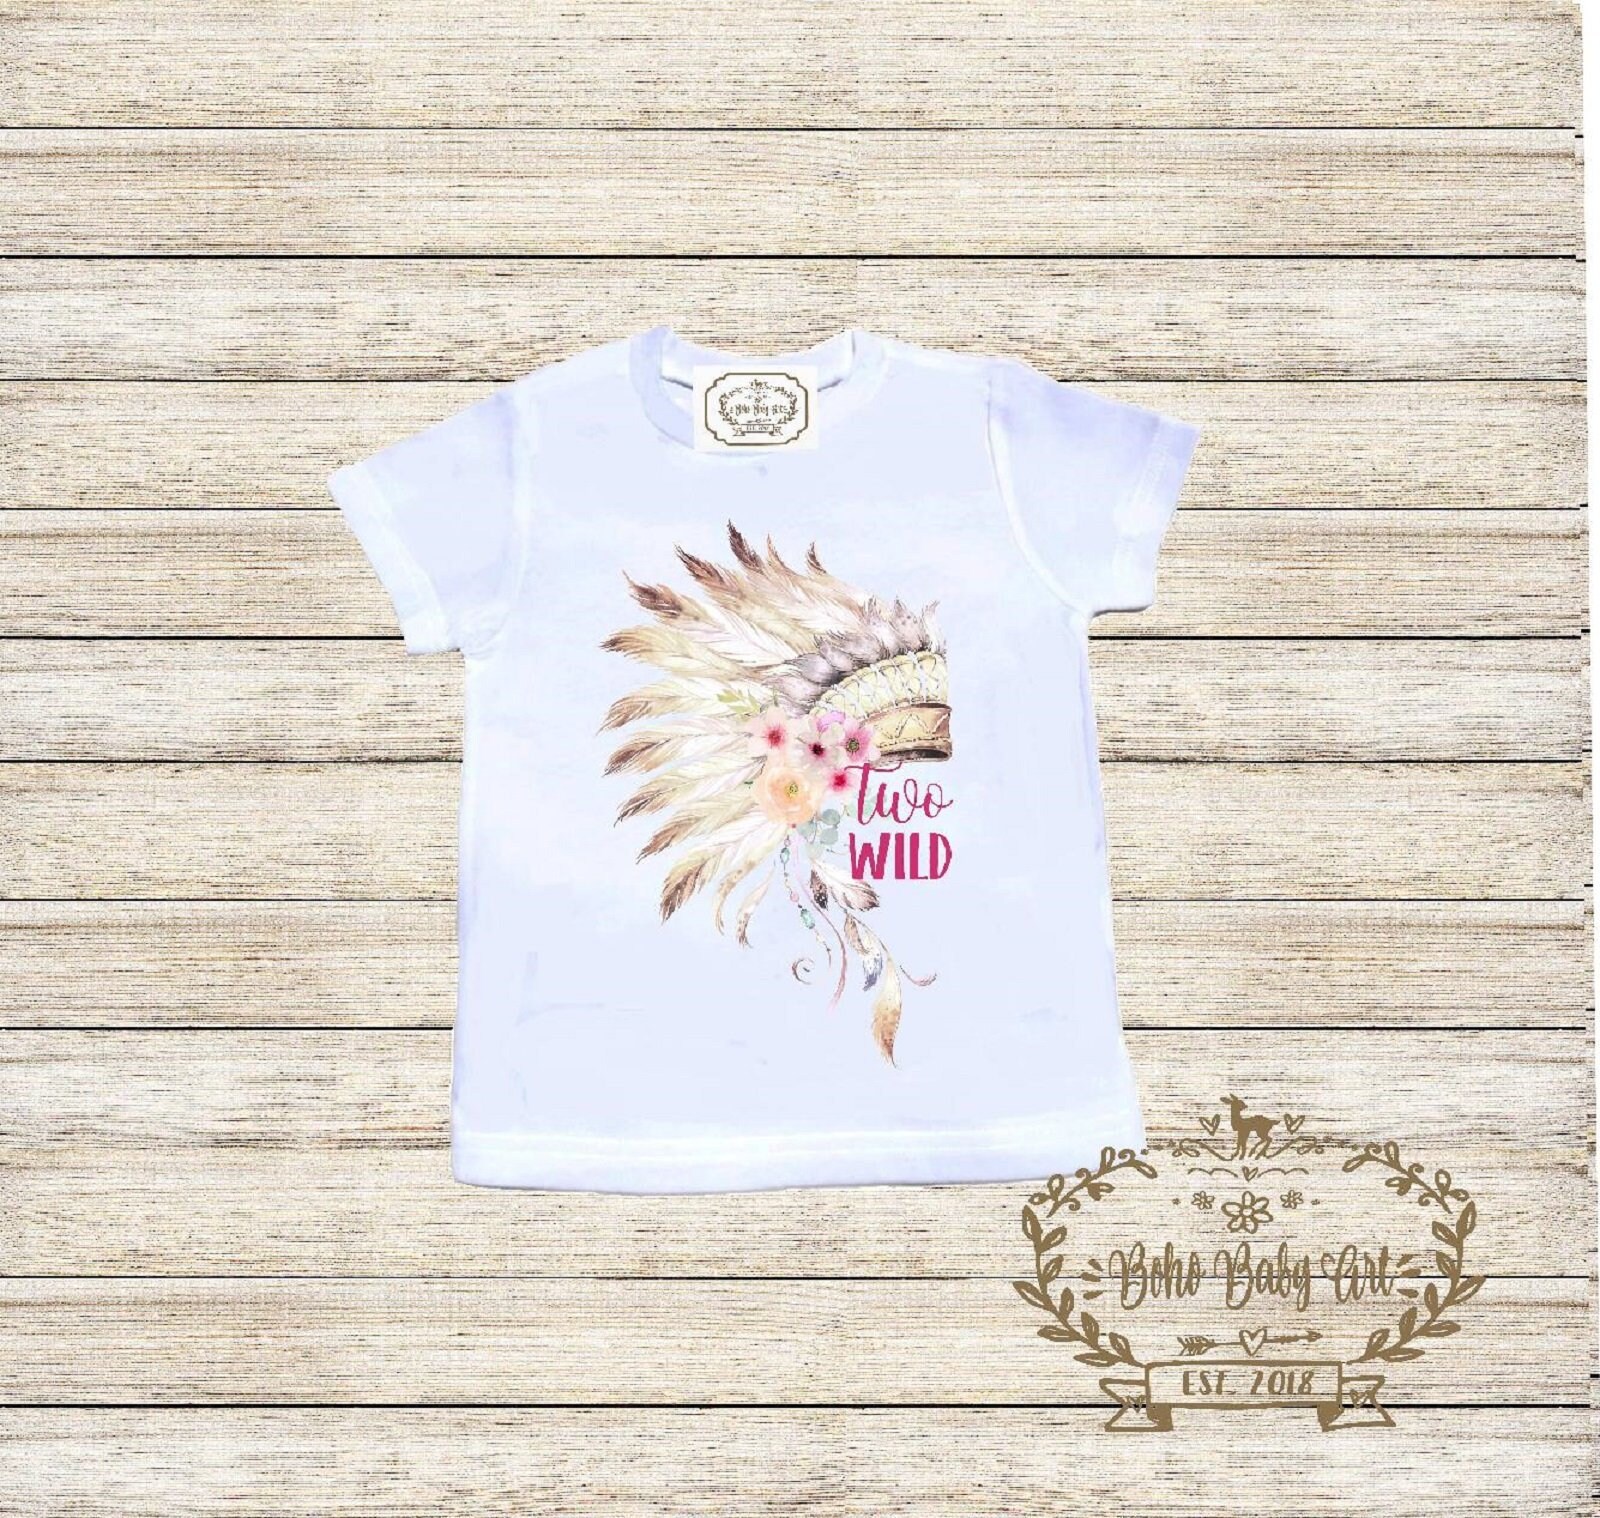 Boho Baby Clothes Wild One Bodysuit Wild One Baby Boho Bodysuit Indian Chief Headdress Outfit Toddler T-shirt Baby Shower Gift Custom Clothes Infant Bodysuit Baby Boho Clothes Baby Boho Designs 